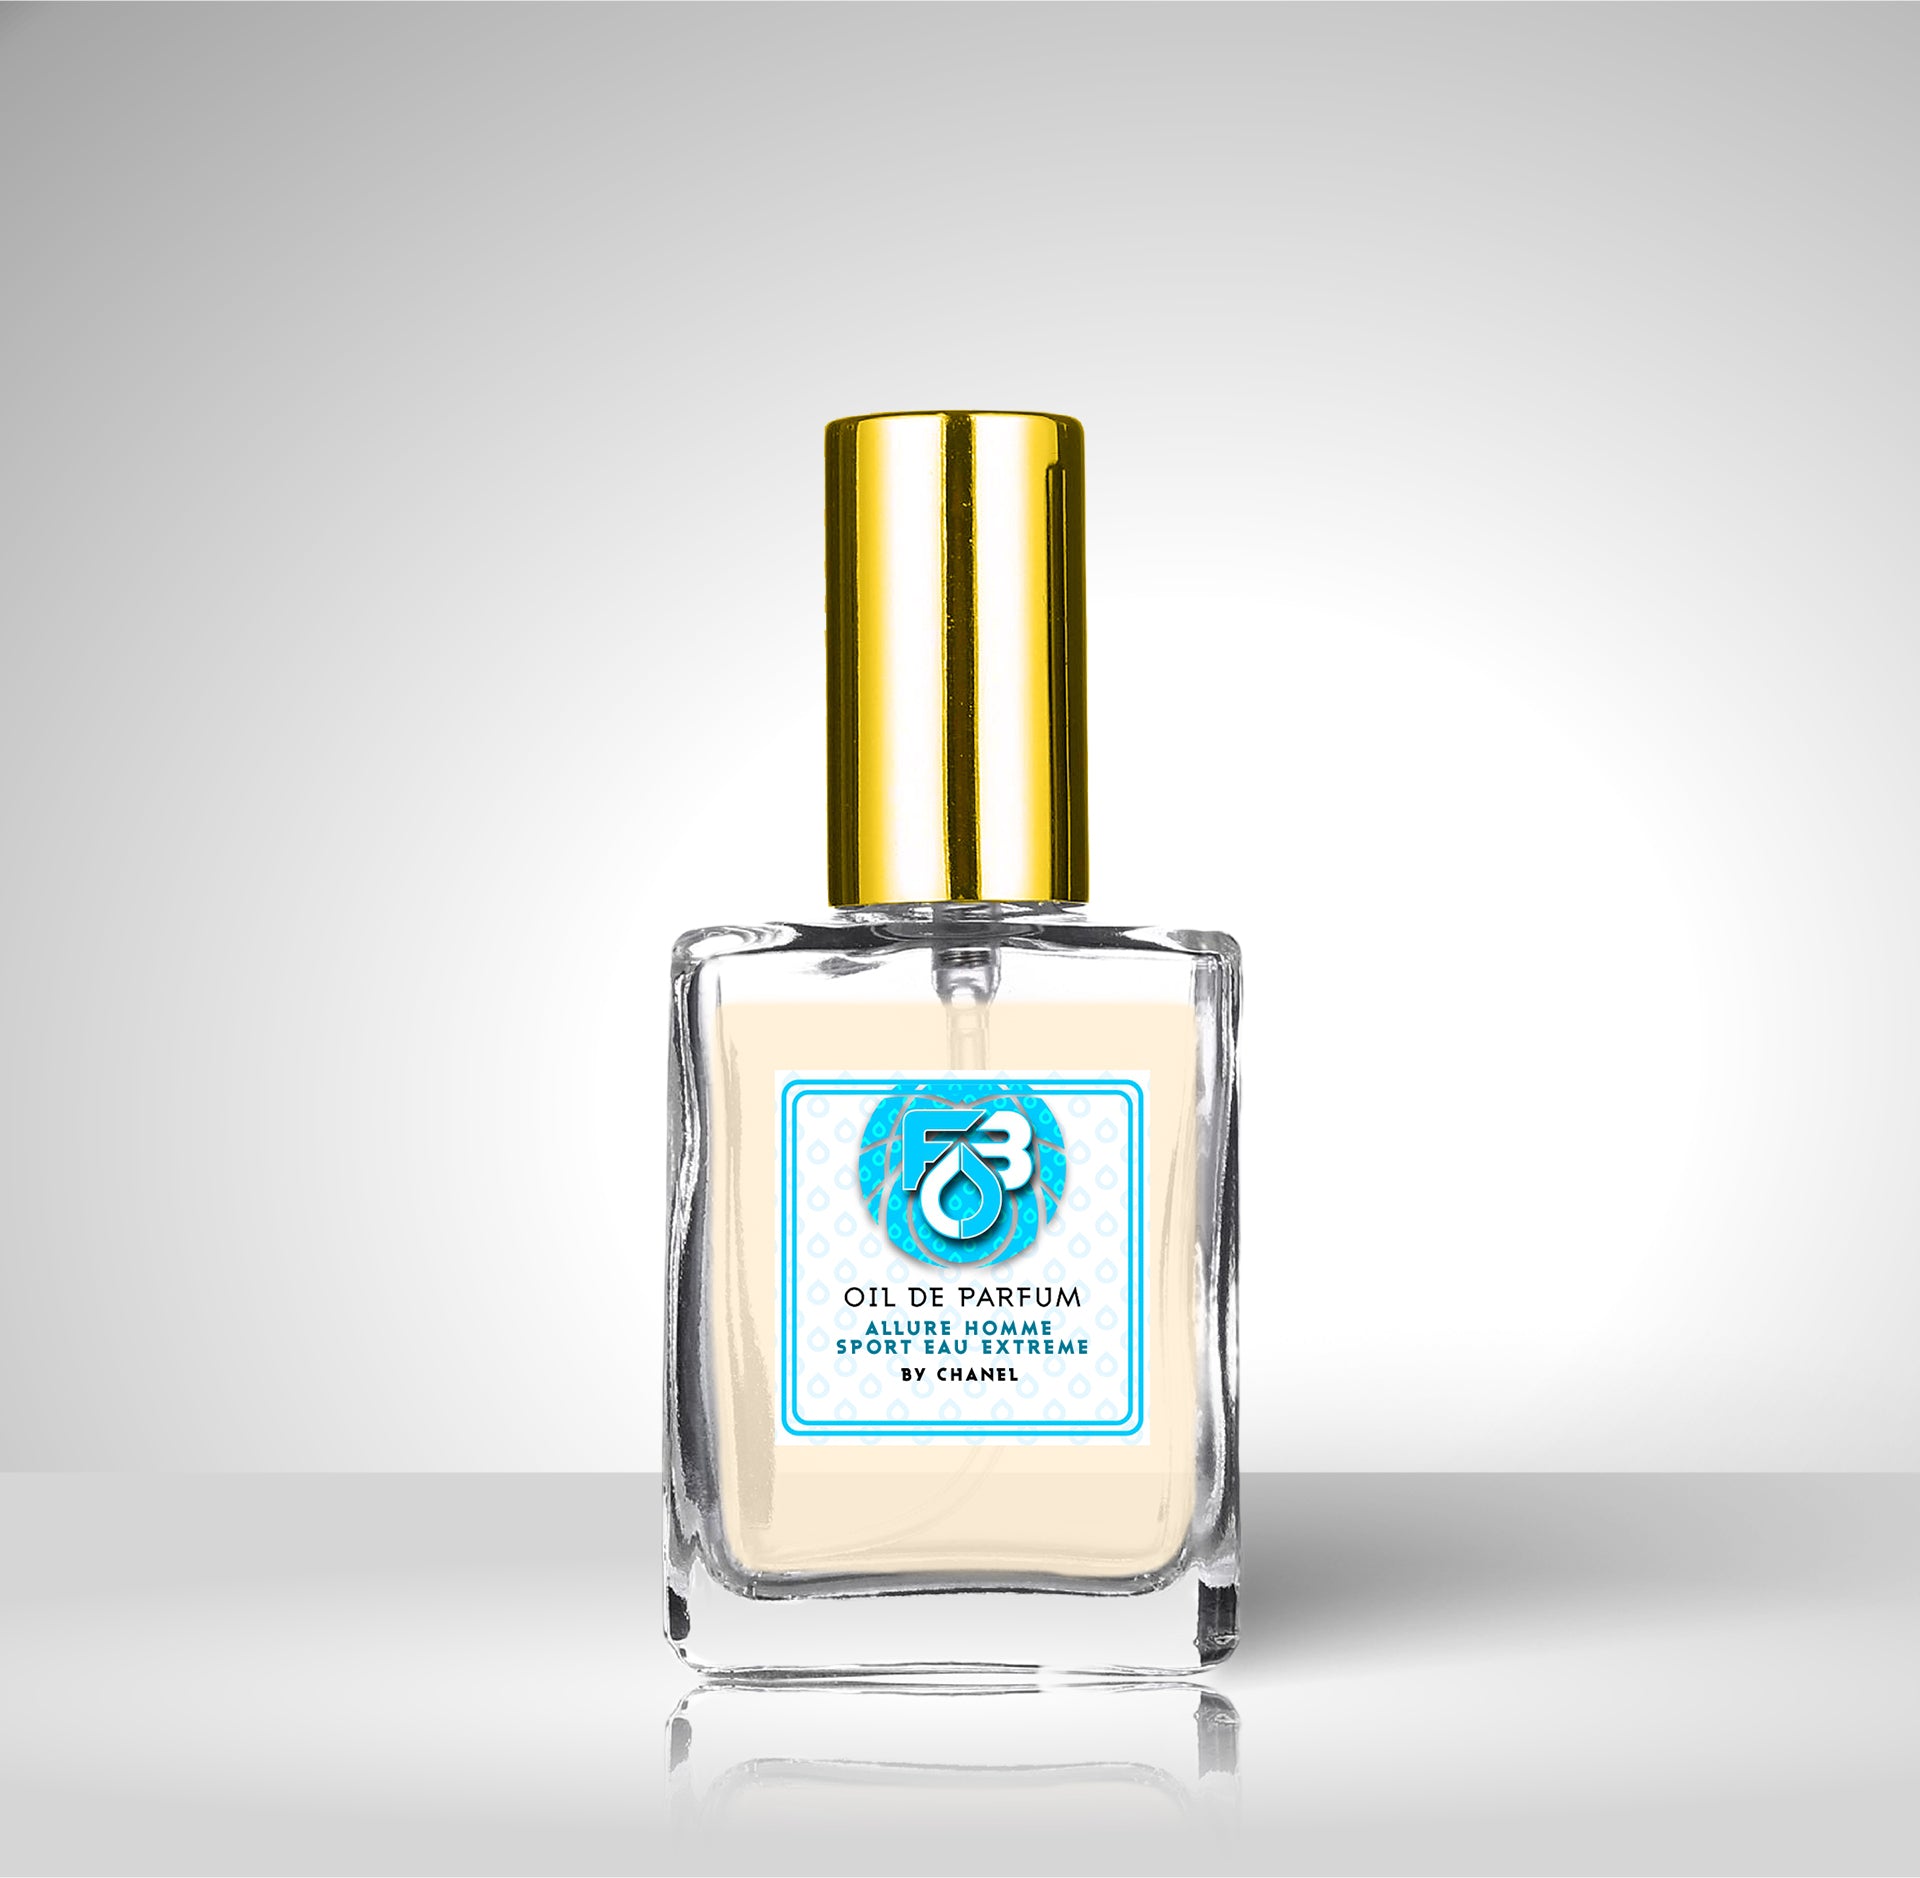 Compare Aroma To Allure Homme Sport Eau Extreme